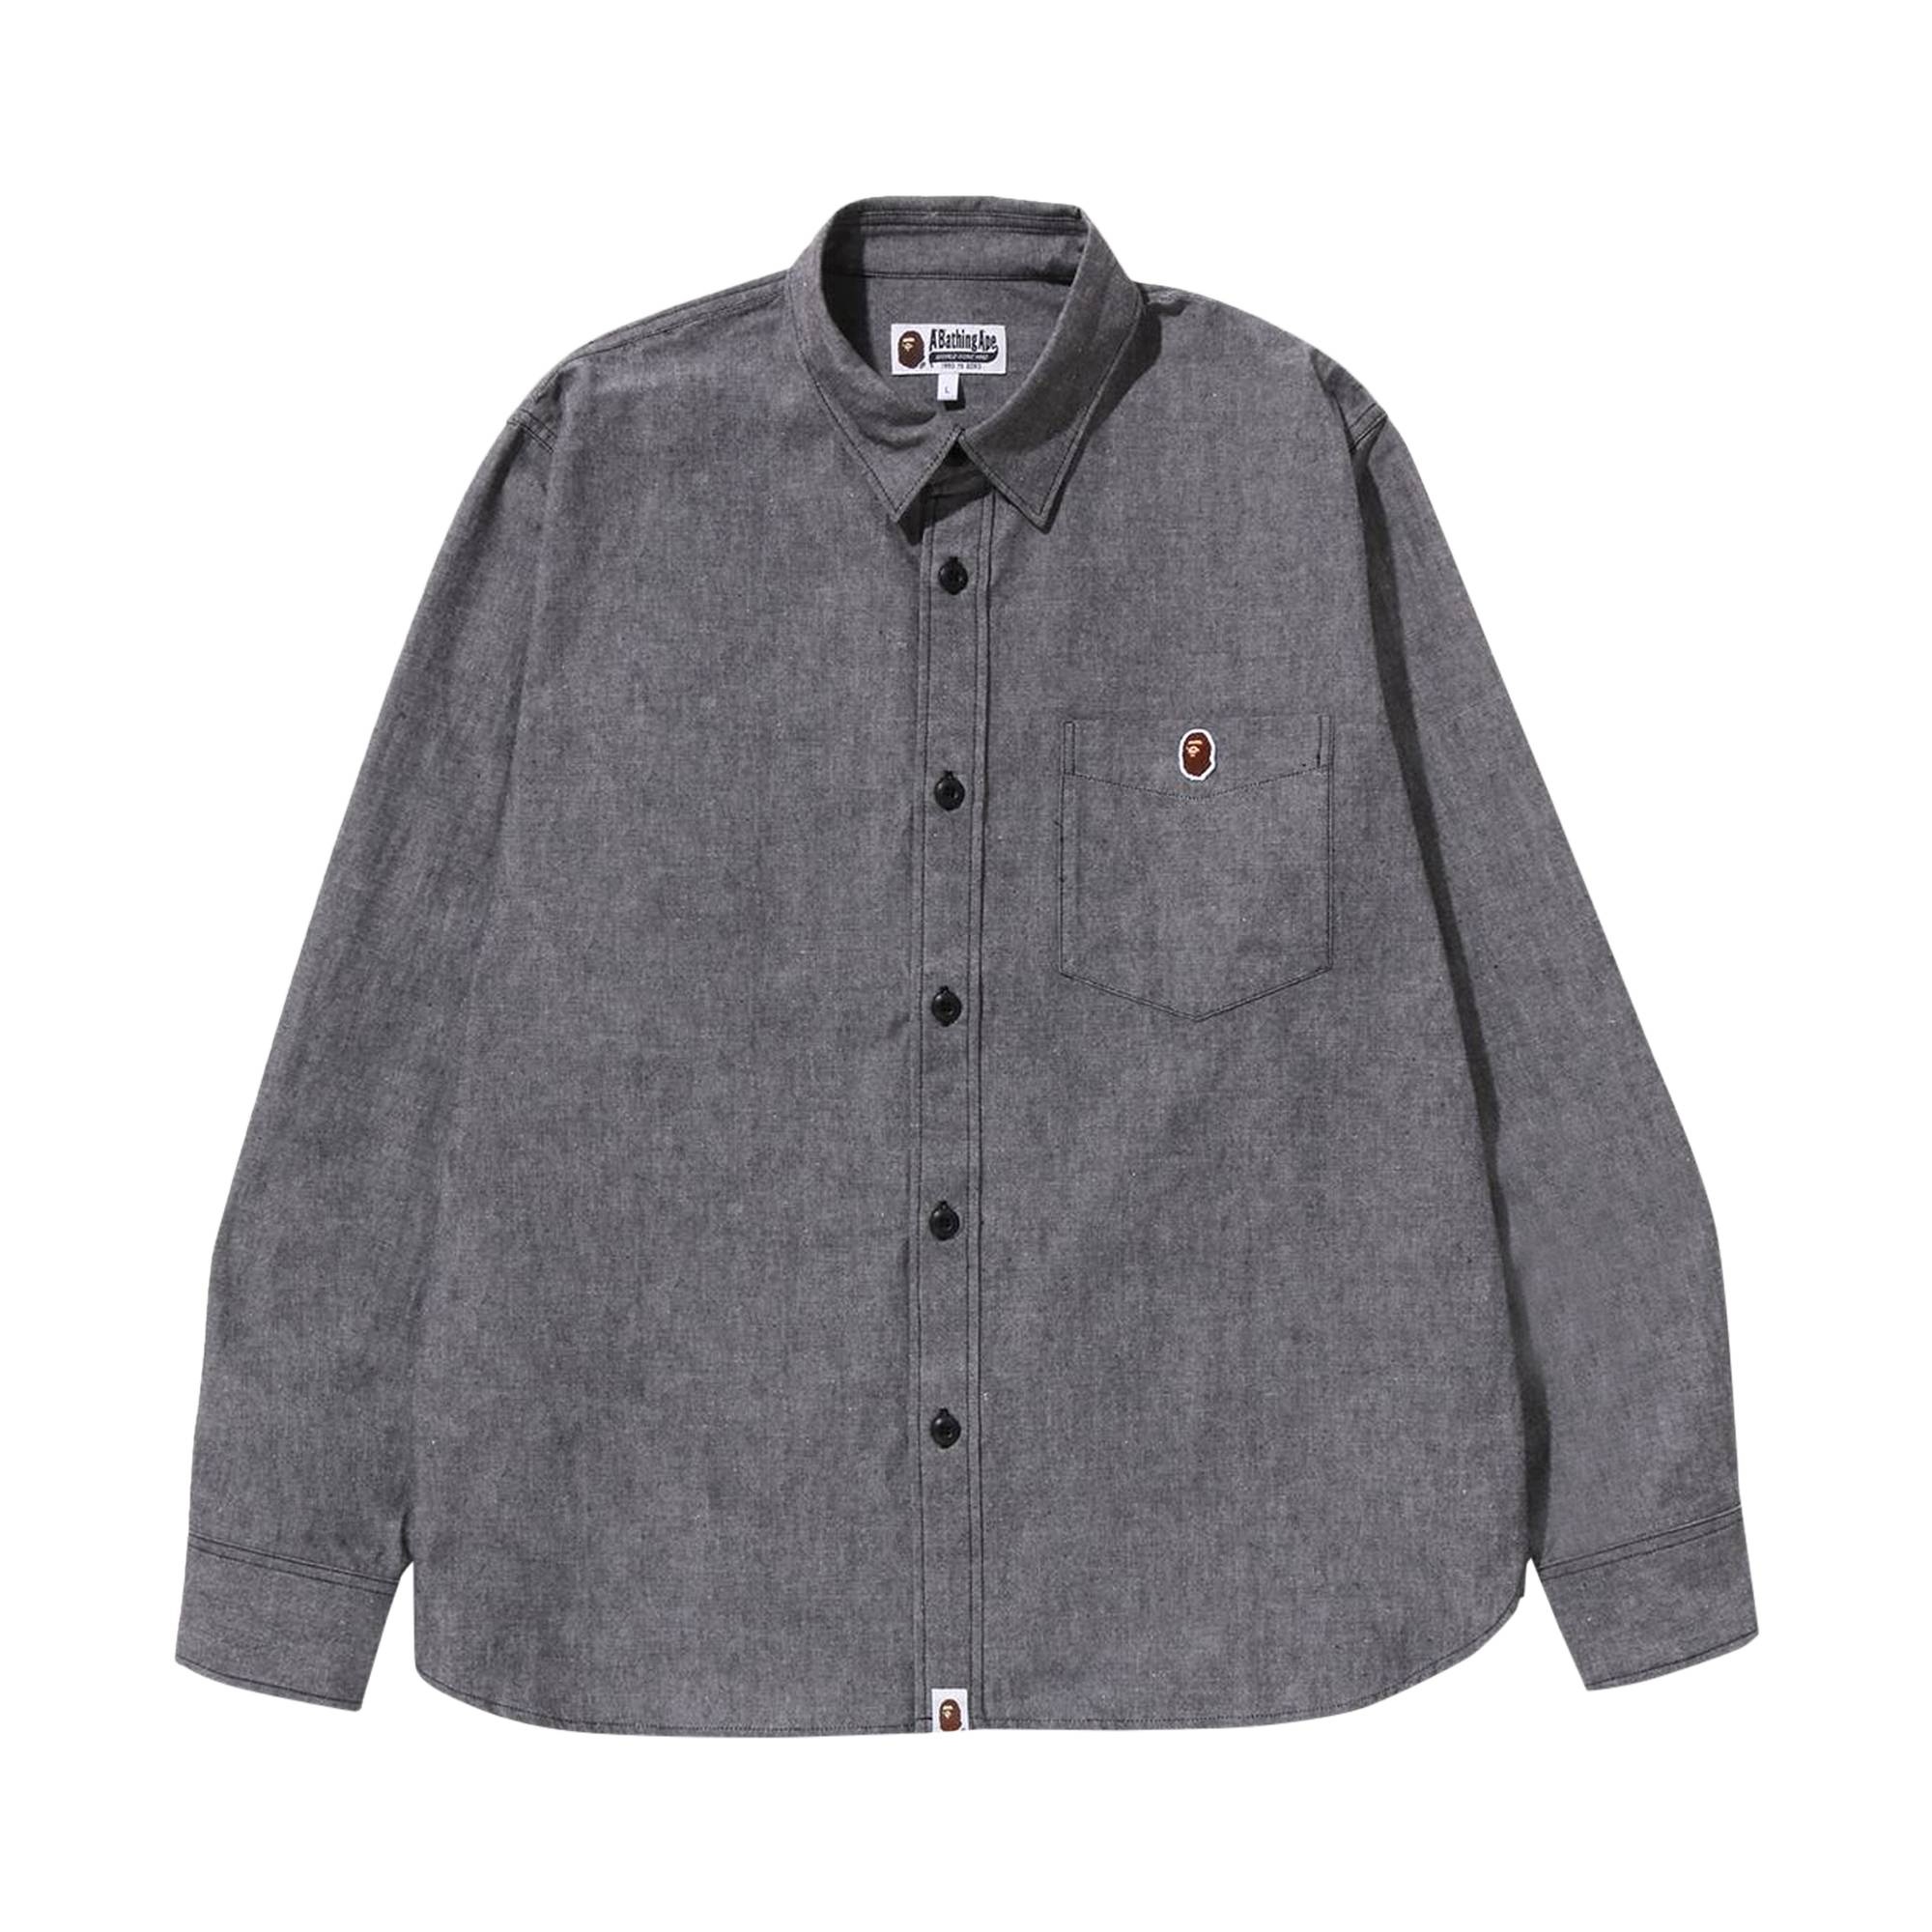 BAPE One Point Relaxed Fit Chambray Shirt 'Black' - 1